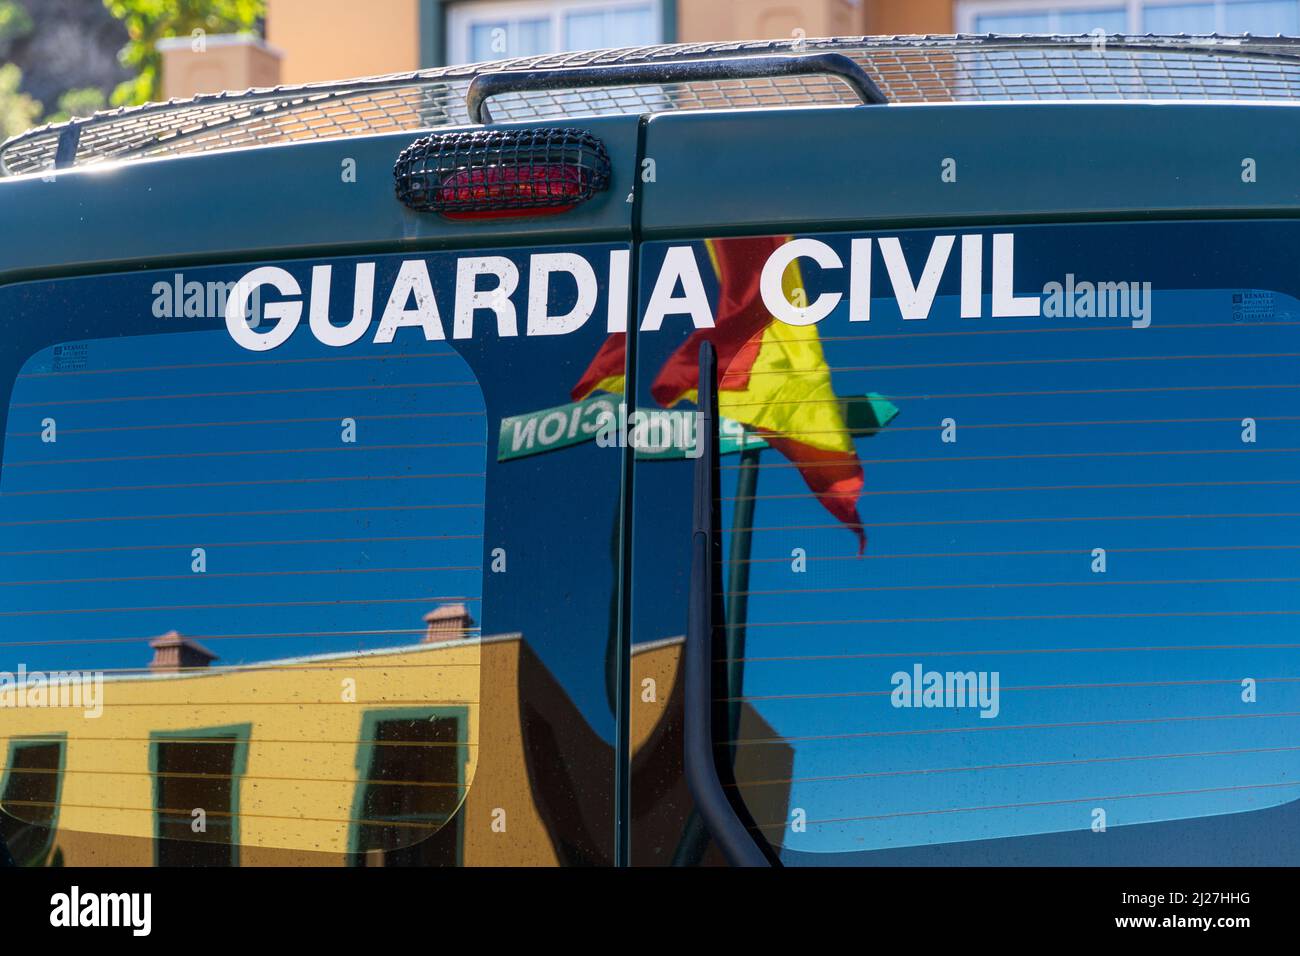 Guardia Civil lettering with Spanish flag on the rear window of an emergency vehicle Stock Photo